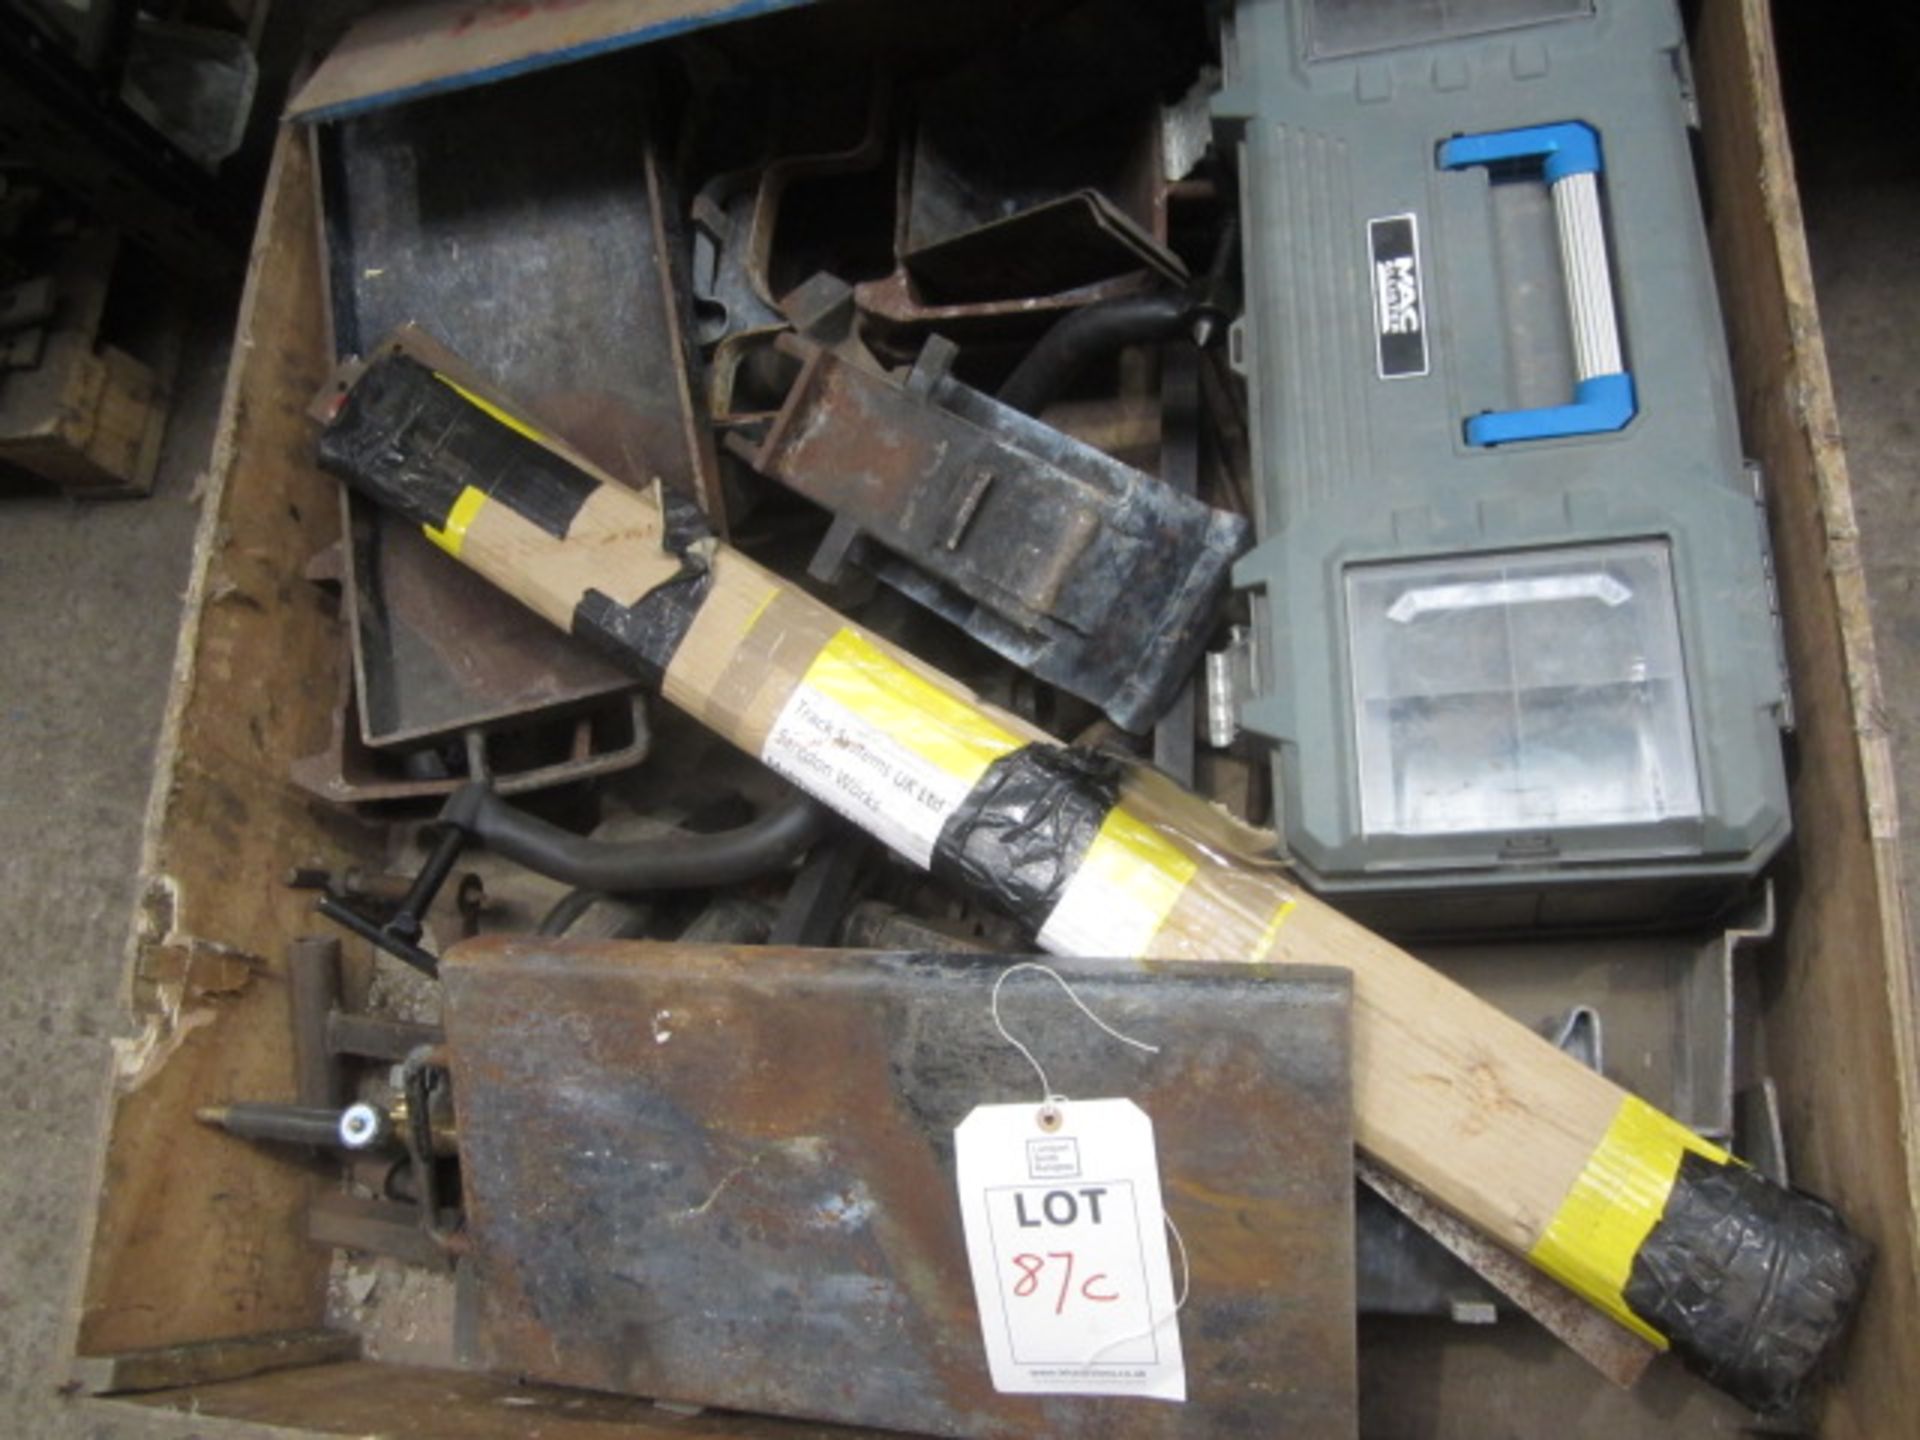 Box of Thermit welding equipment including torches, assorted moulds, etc.